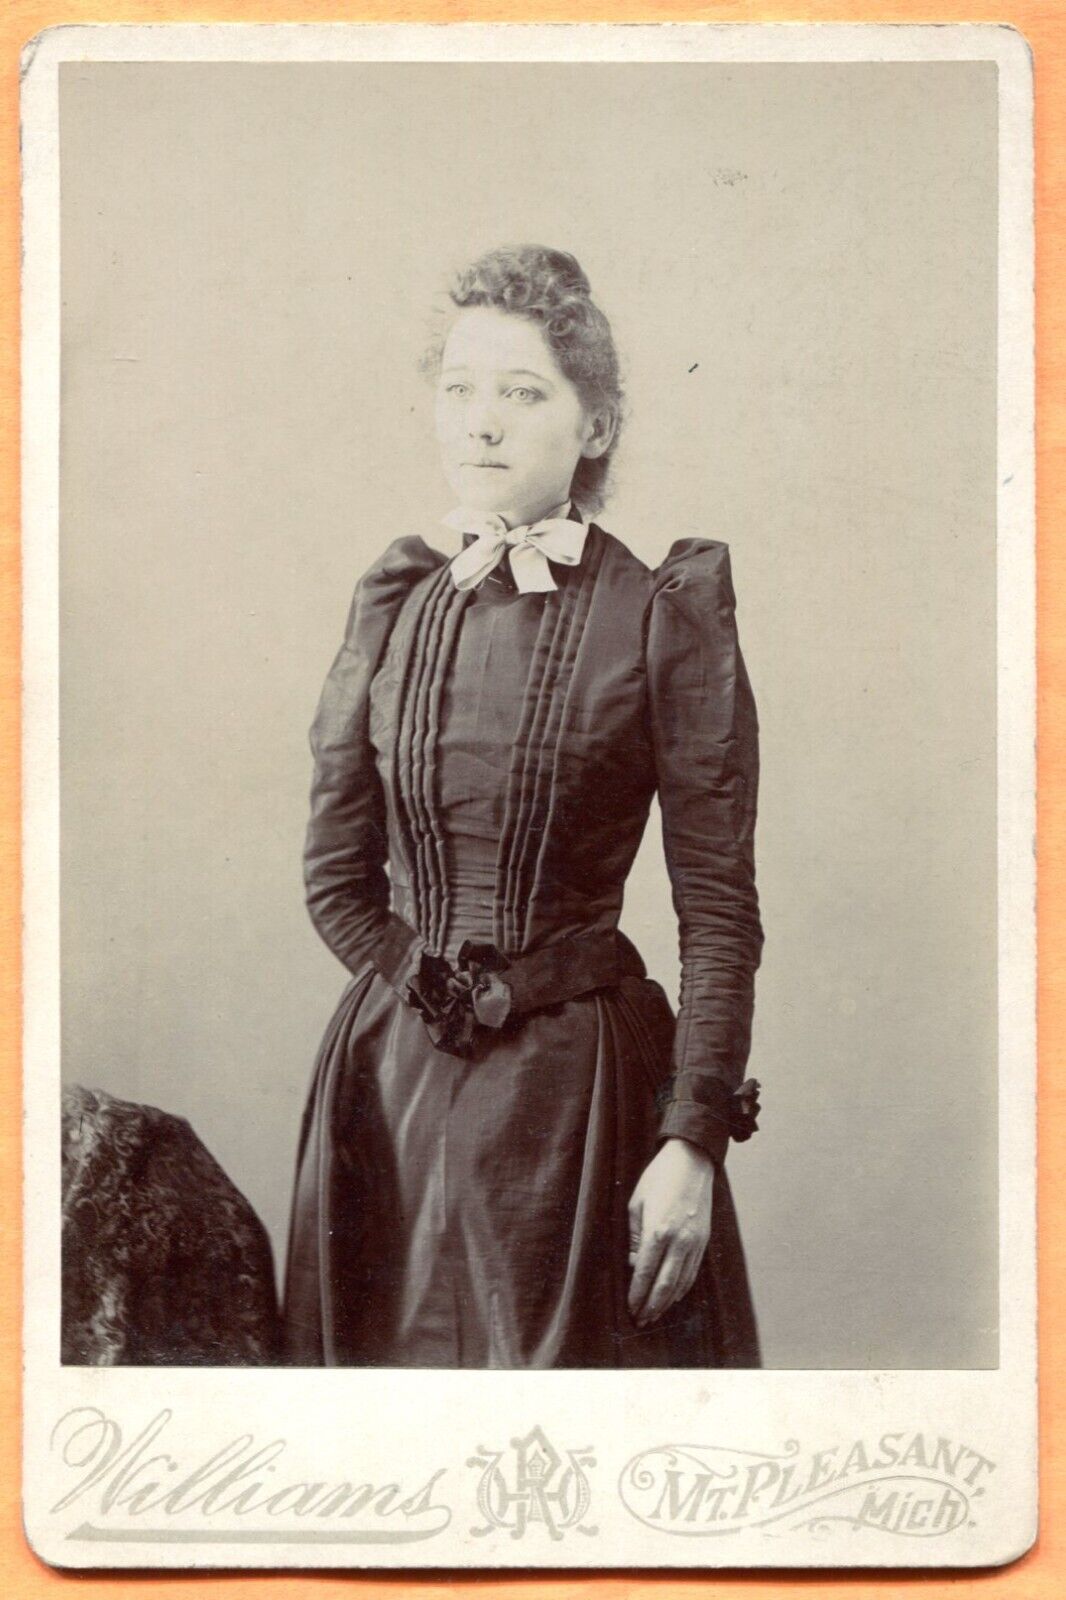 Mount Pleasant MI Portrait of a Young Woman by Williams, circa 1890s